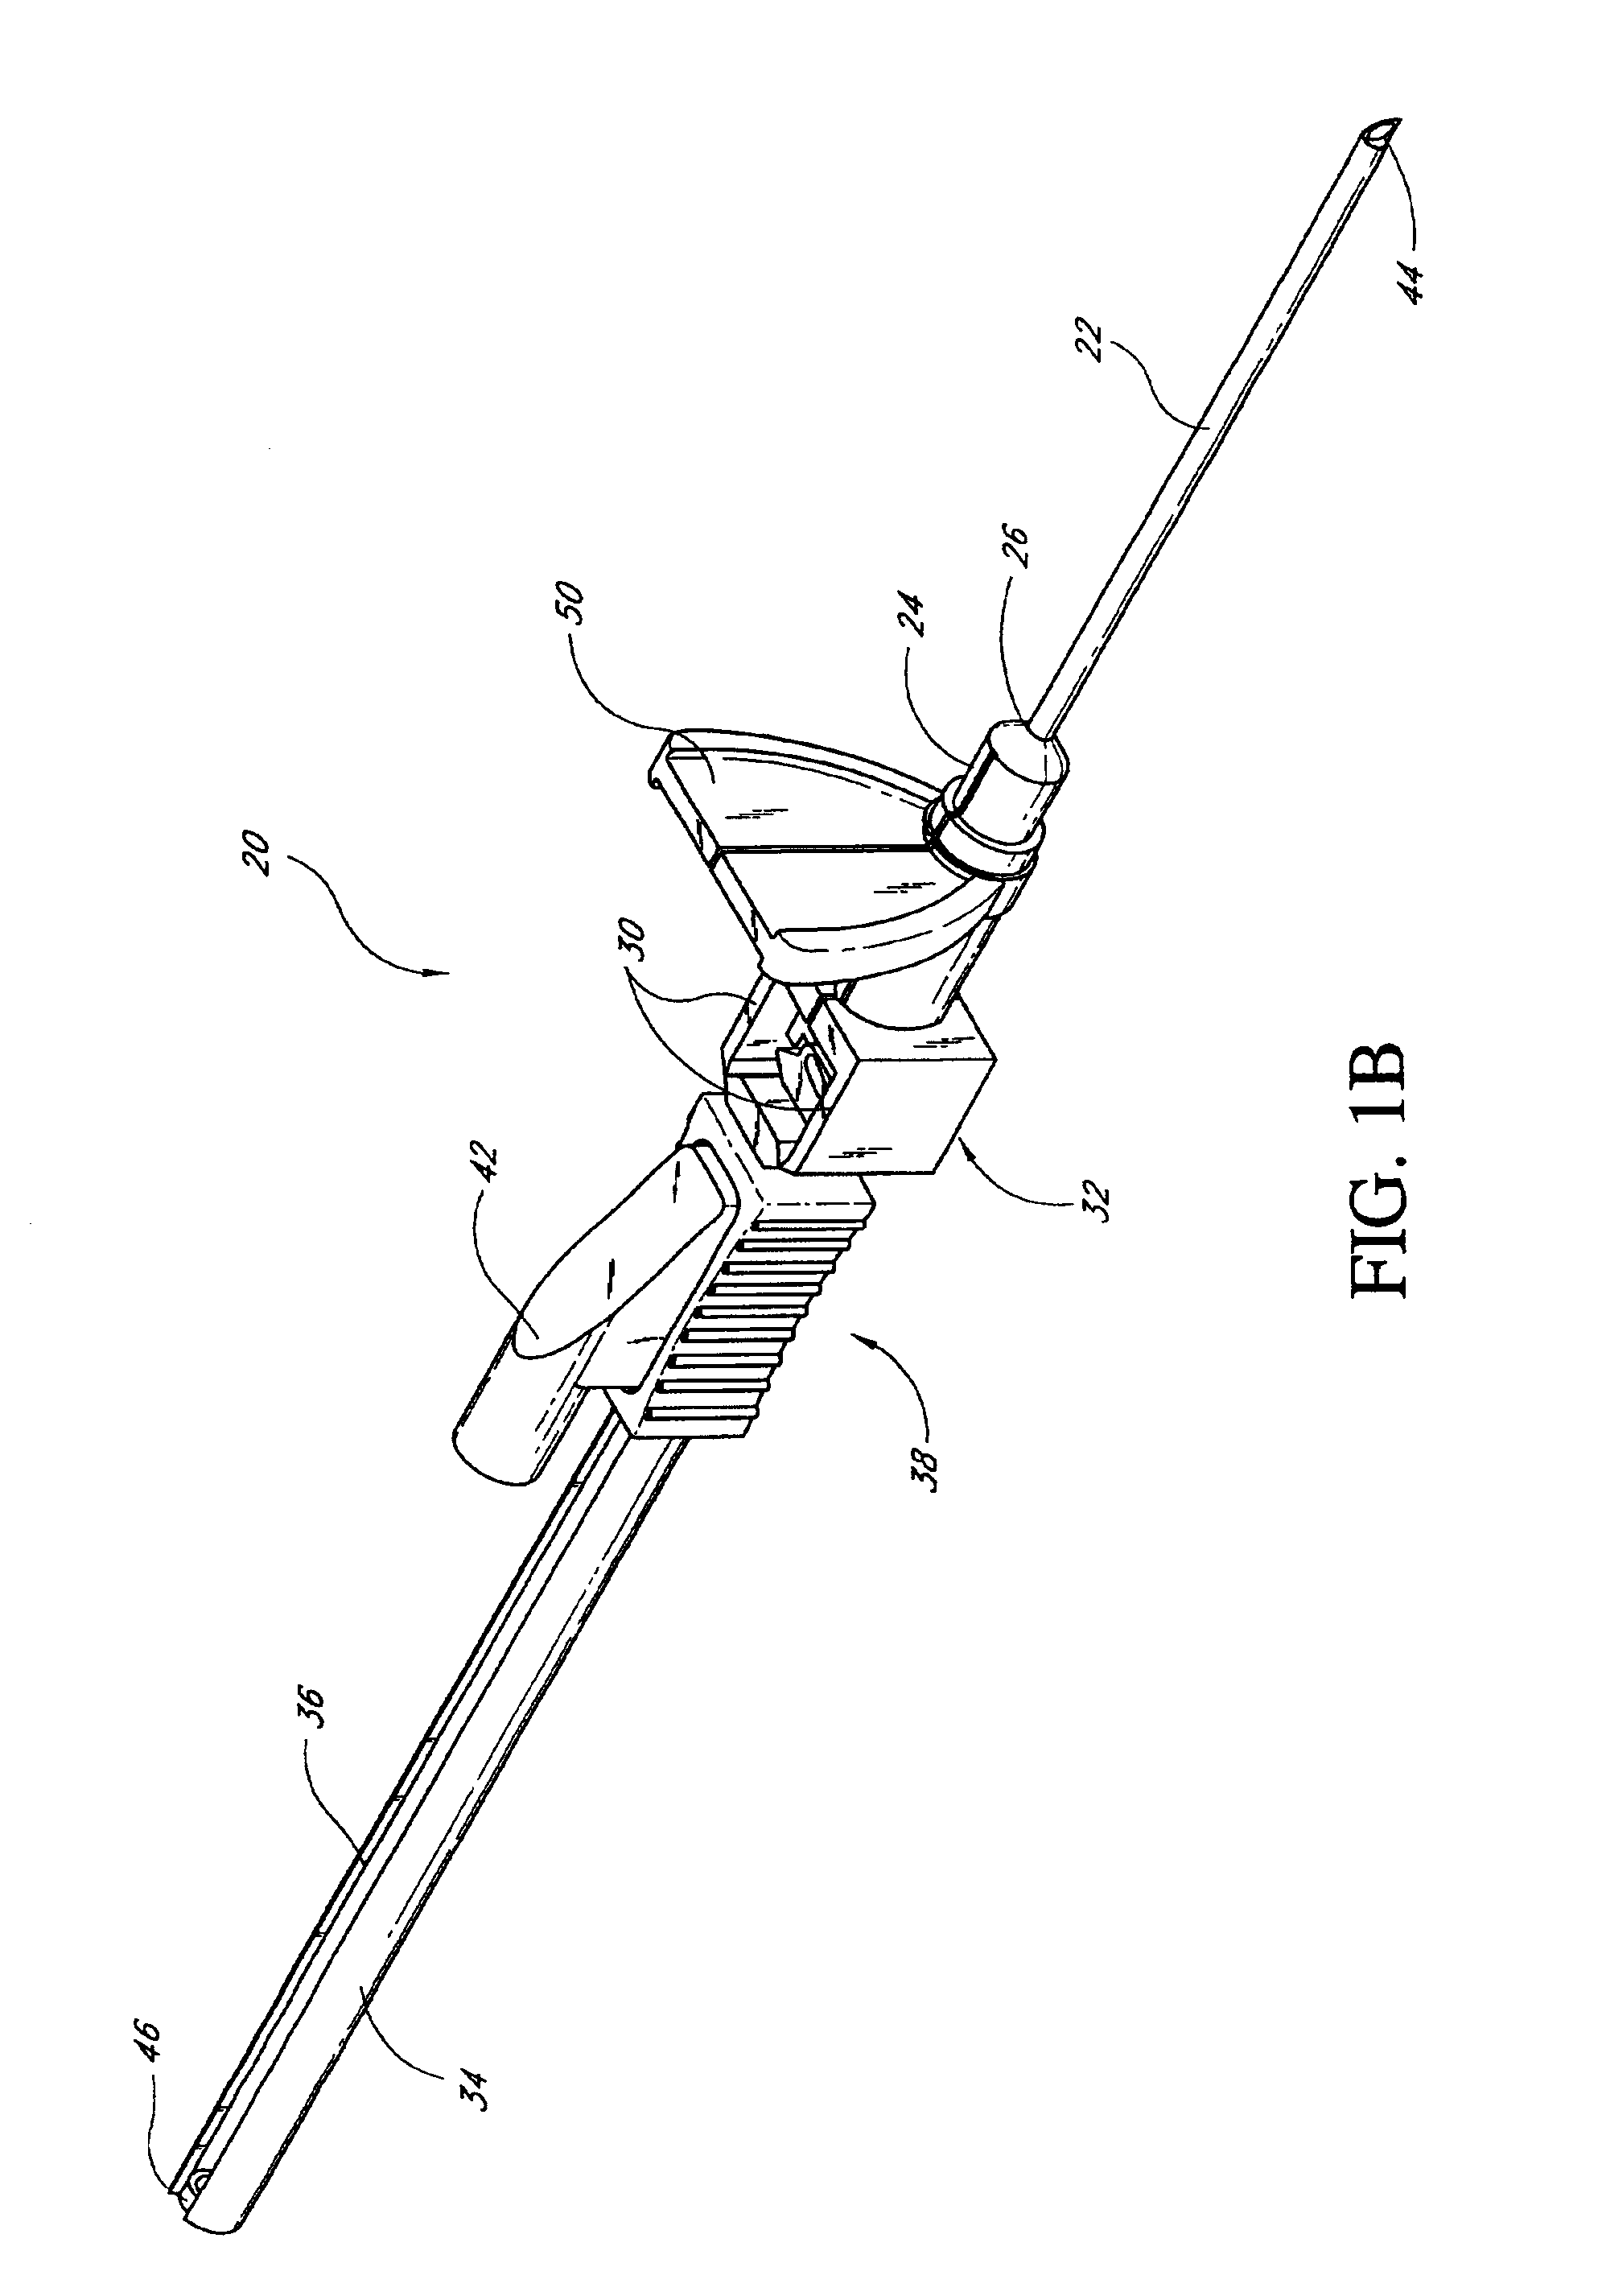 Universal passive protector for an IV catheter